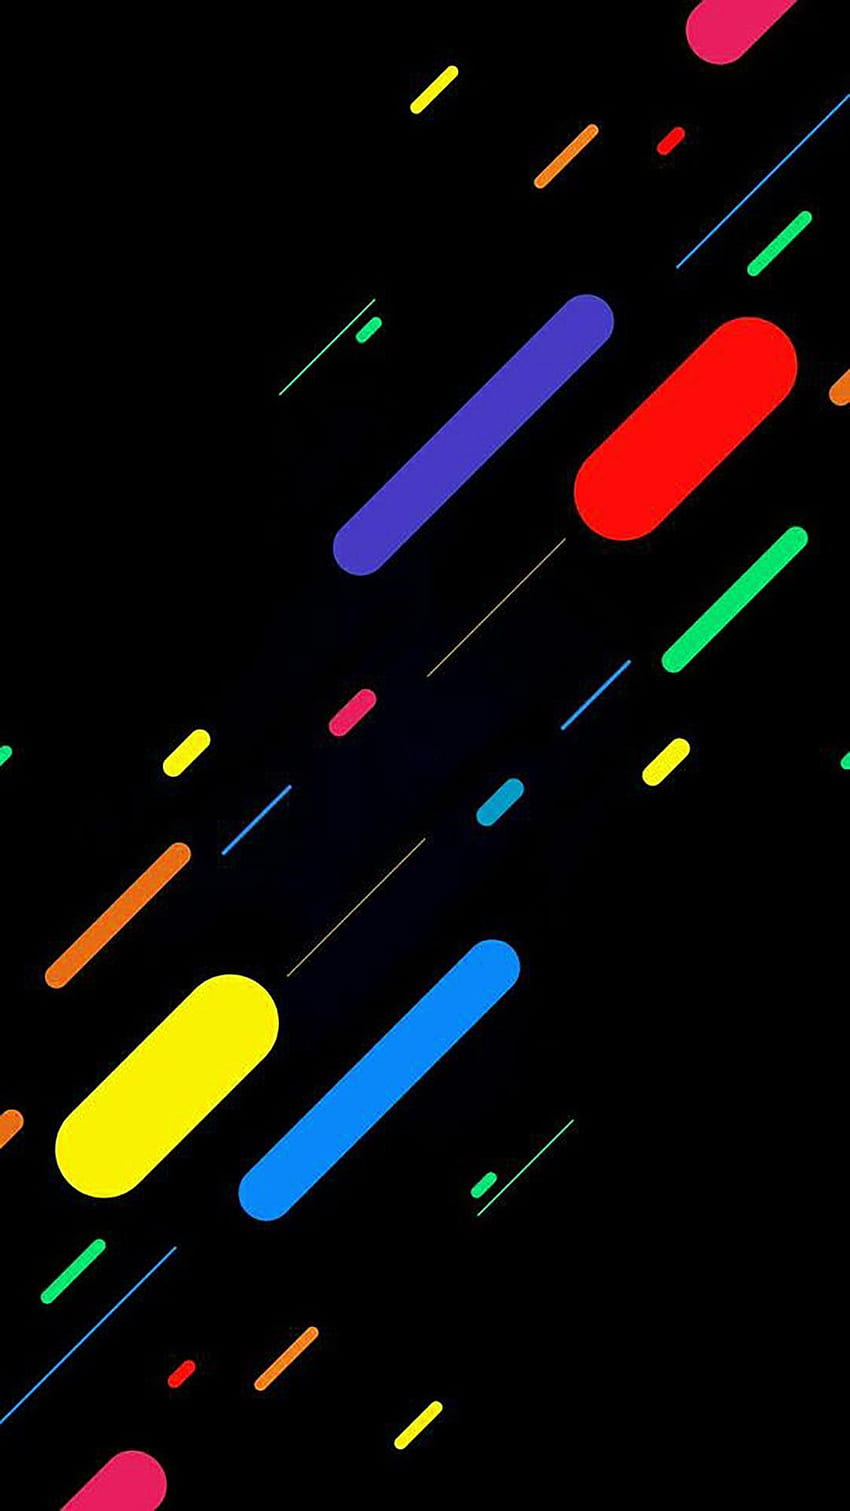 Super AMOLED for Android, Neon AMOLED HD phone wallpaper